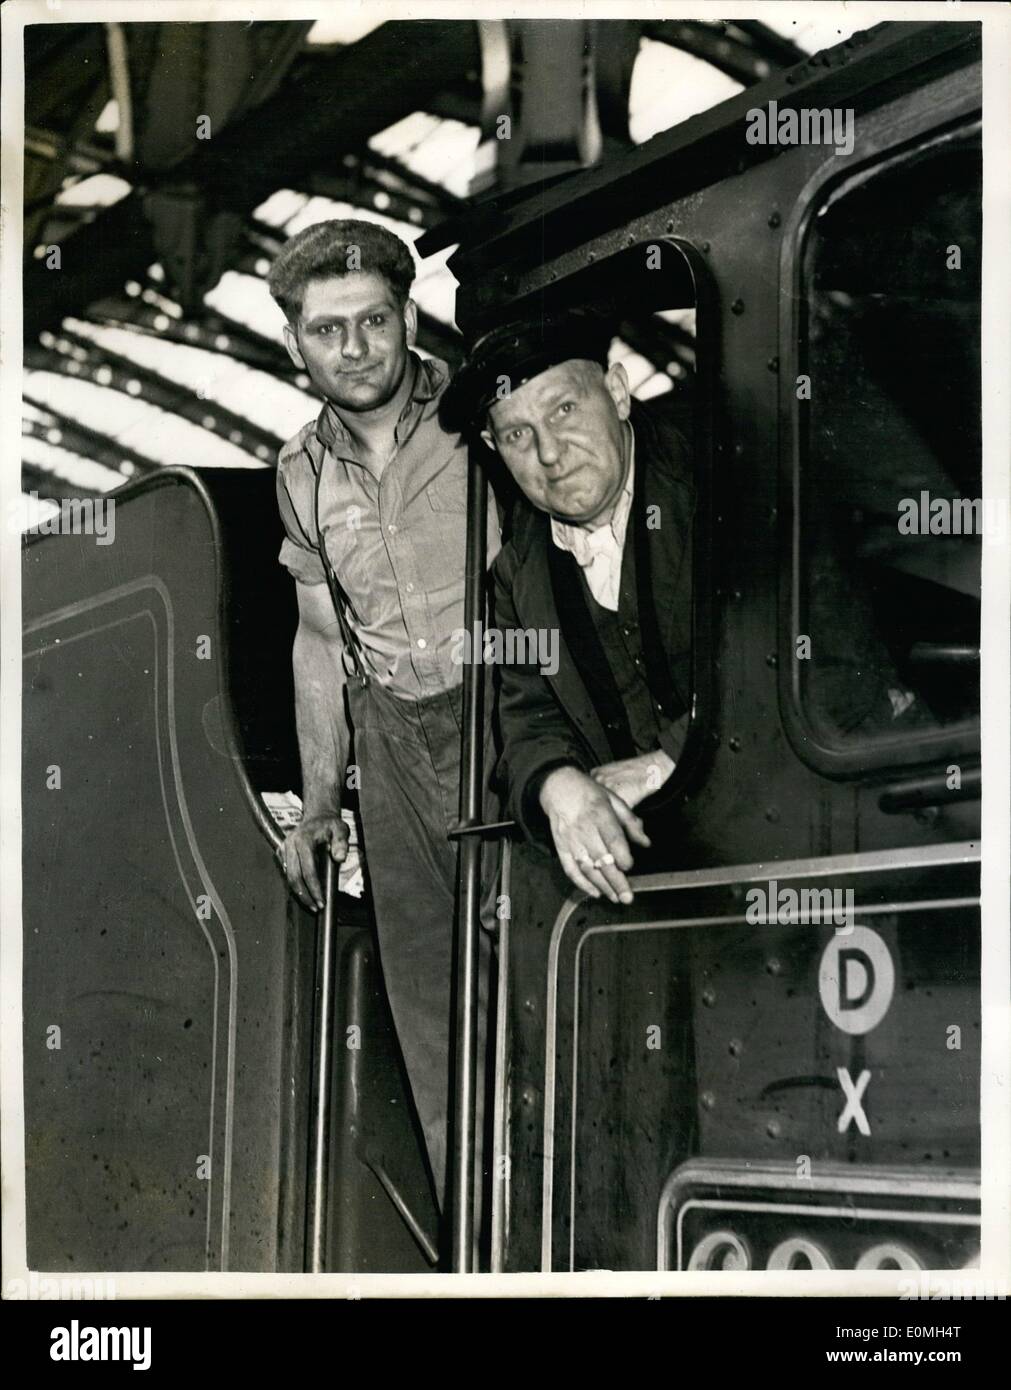 May 05, 1955 - Rail strike scenes. Stranded Holiday makers rescued.: A 23 year old fireman and his engine driver stepfather yesterday rescued 950 stranded holiday-makers. The two drove the only train from Plymouth to Paddington. When Bill Hare, fireman and member of the striking union learned out of his engine cab at Paddington, mothers with children rushed up to shake his hand. They cheered him and driver Harry Samuel. Bill and Harry both live in Taunton. Harry, who is 62, and an engine driver for 33 years, is a member of the N.U.R Stock Photo